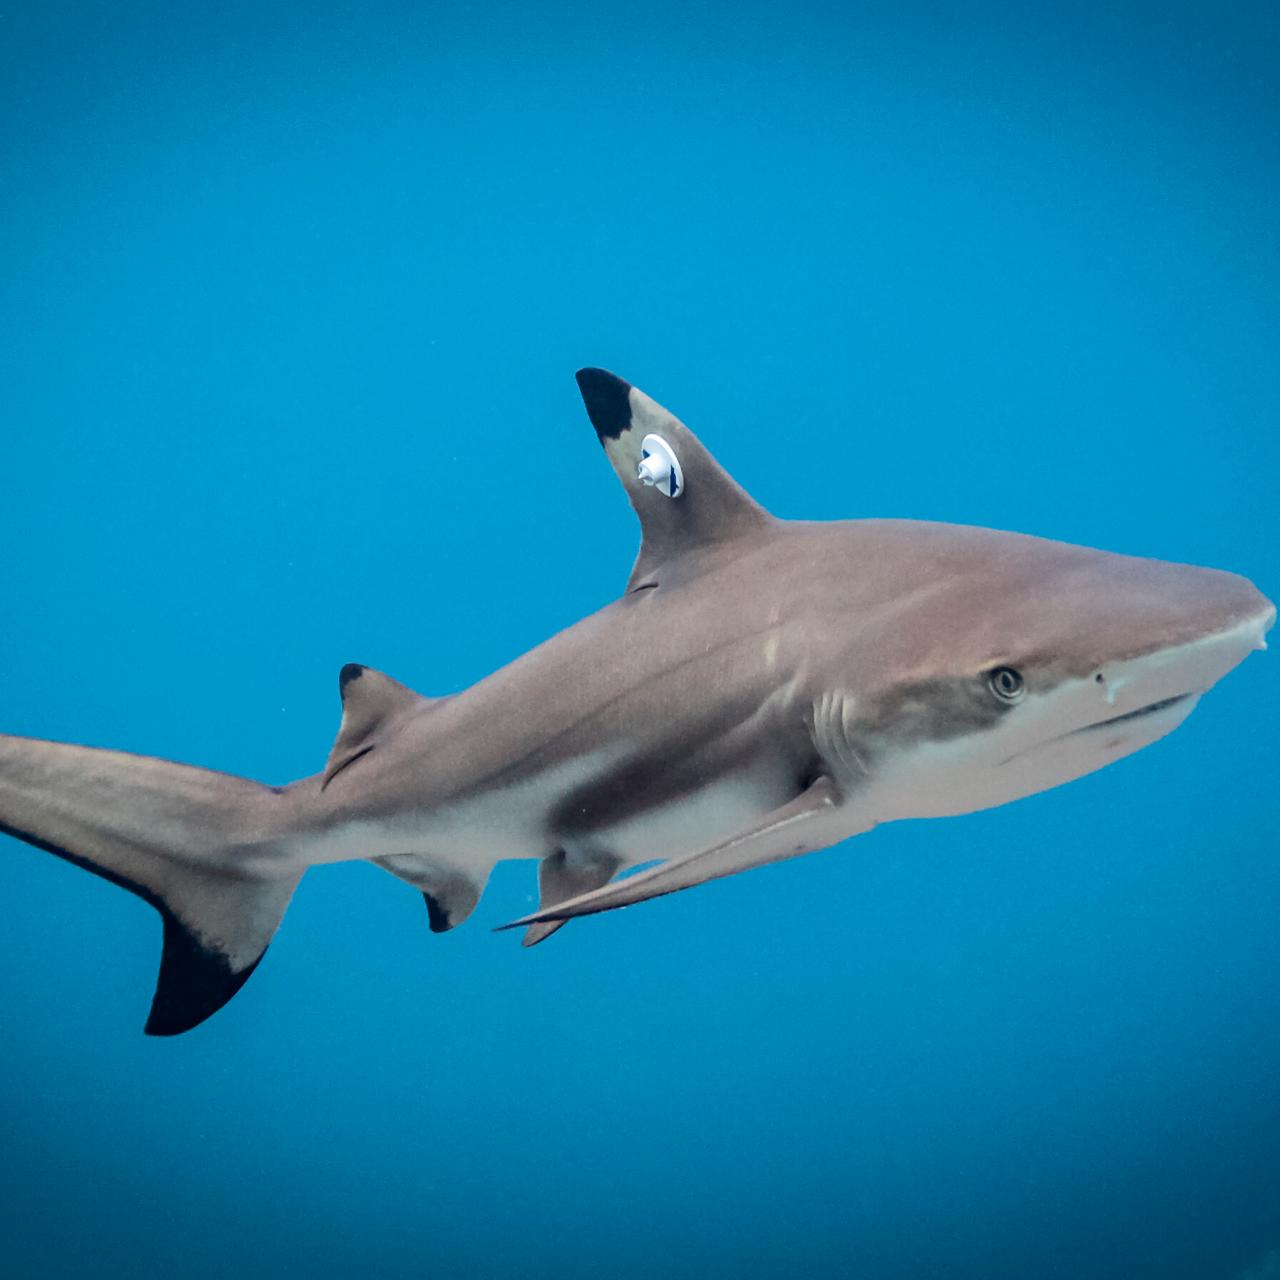 Shark Tracking is a Precious Conservation Tool for Saving the